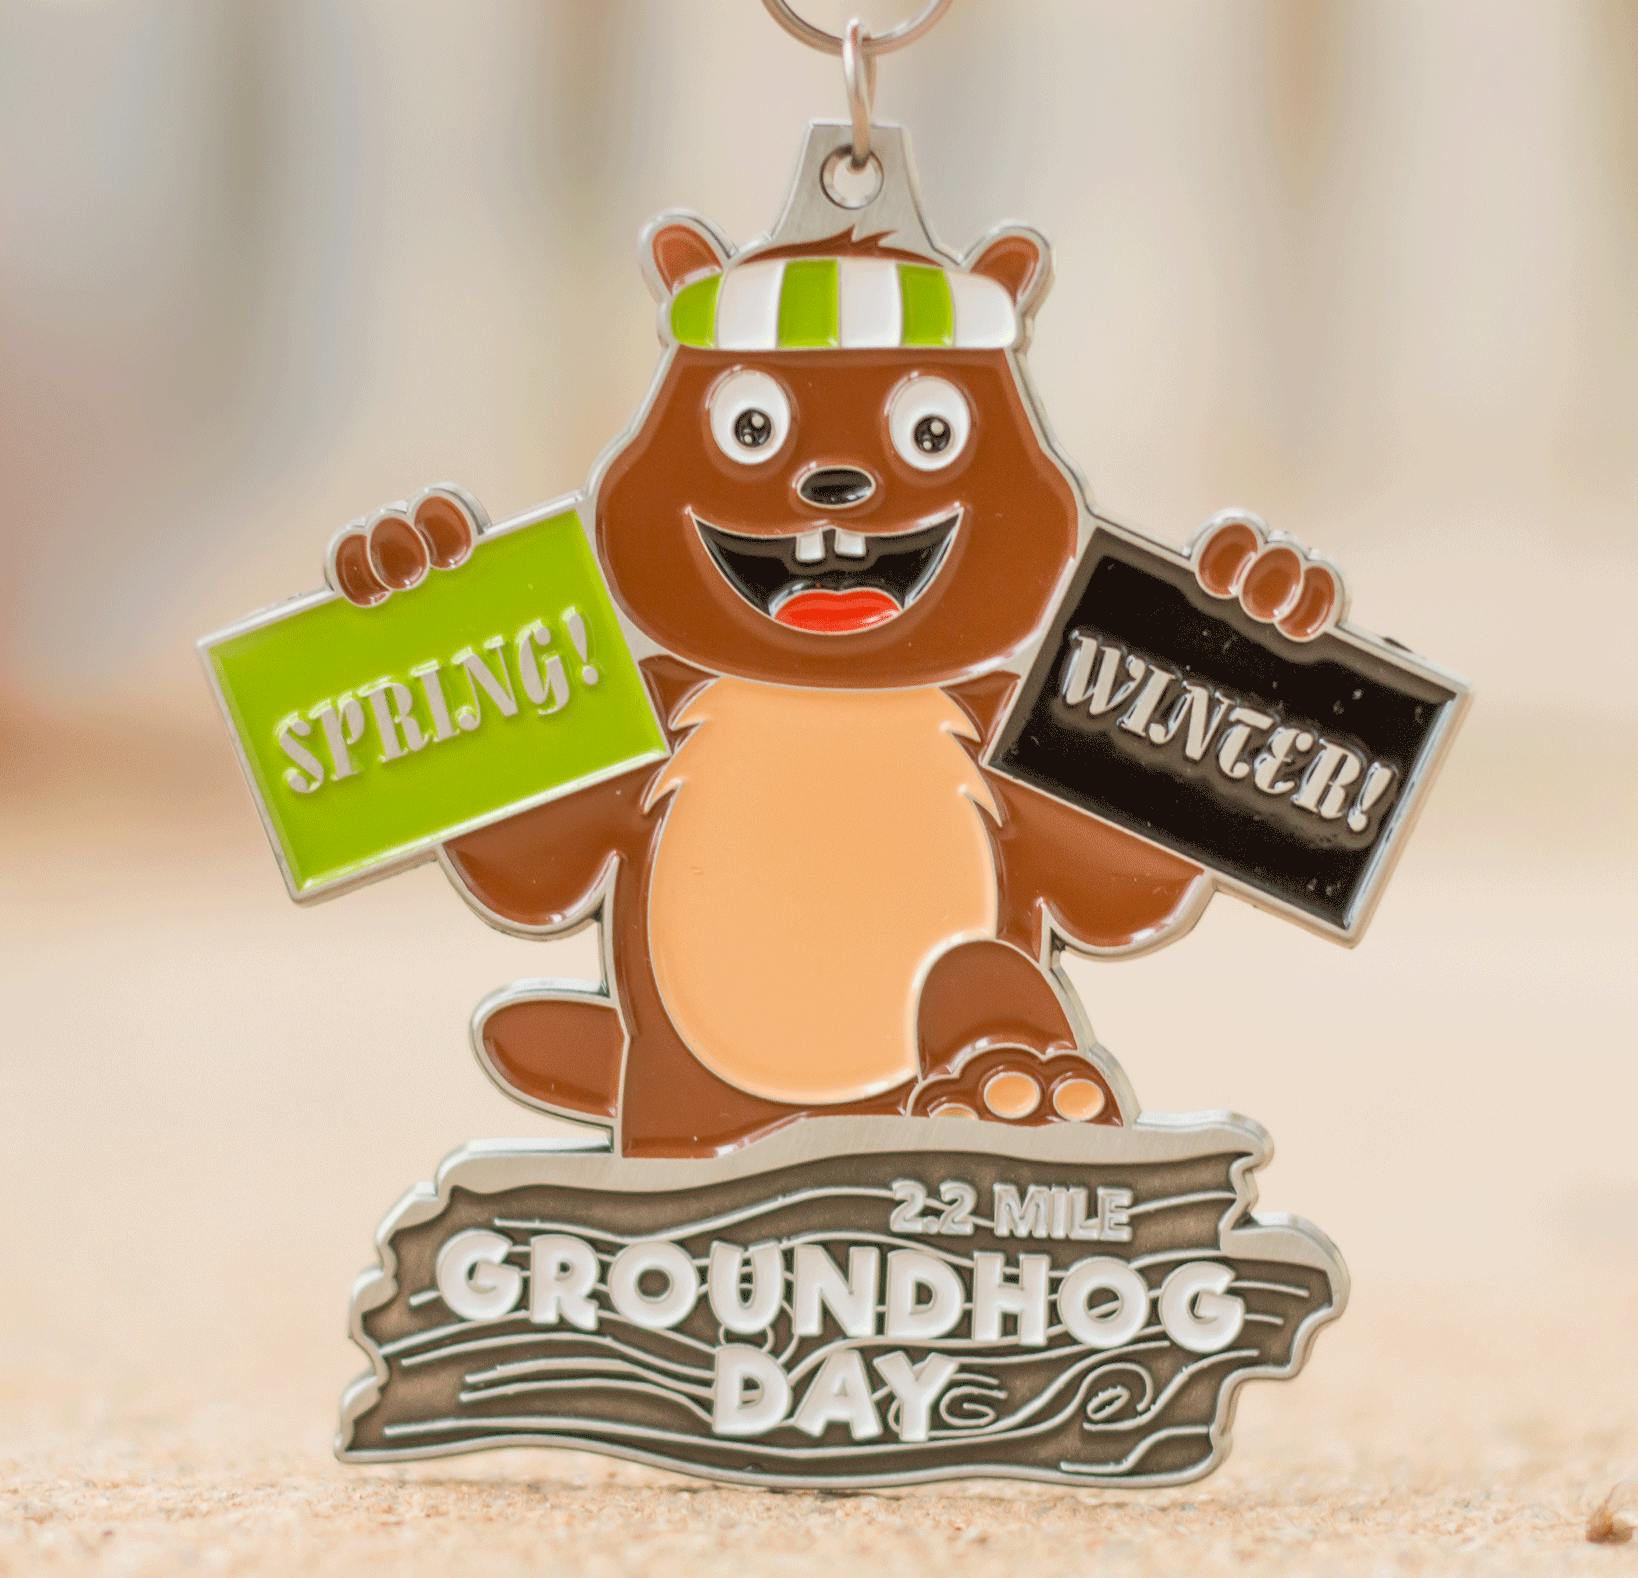 Now Only $8.00! 2018 Groundhog Day 2.2 Mile- Tampa